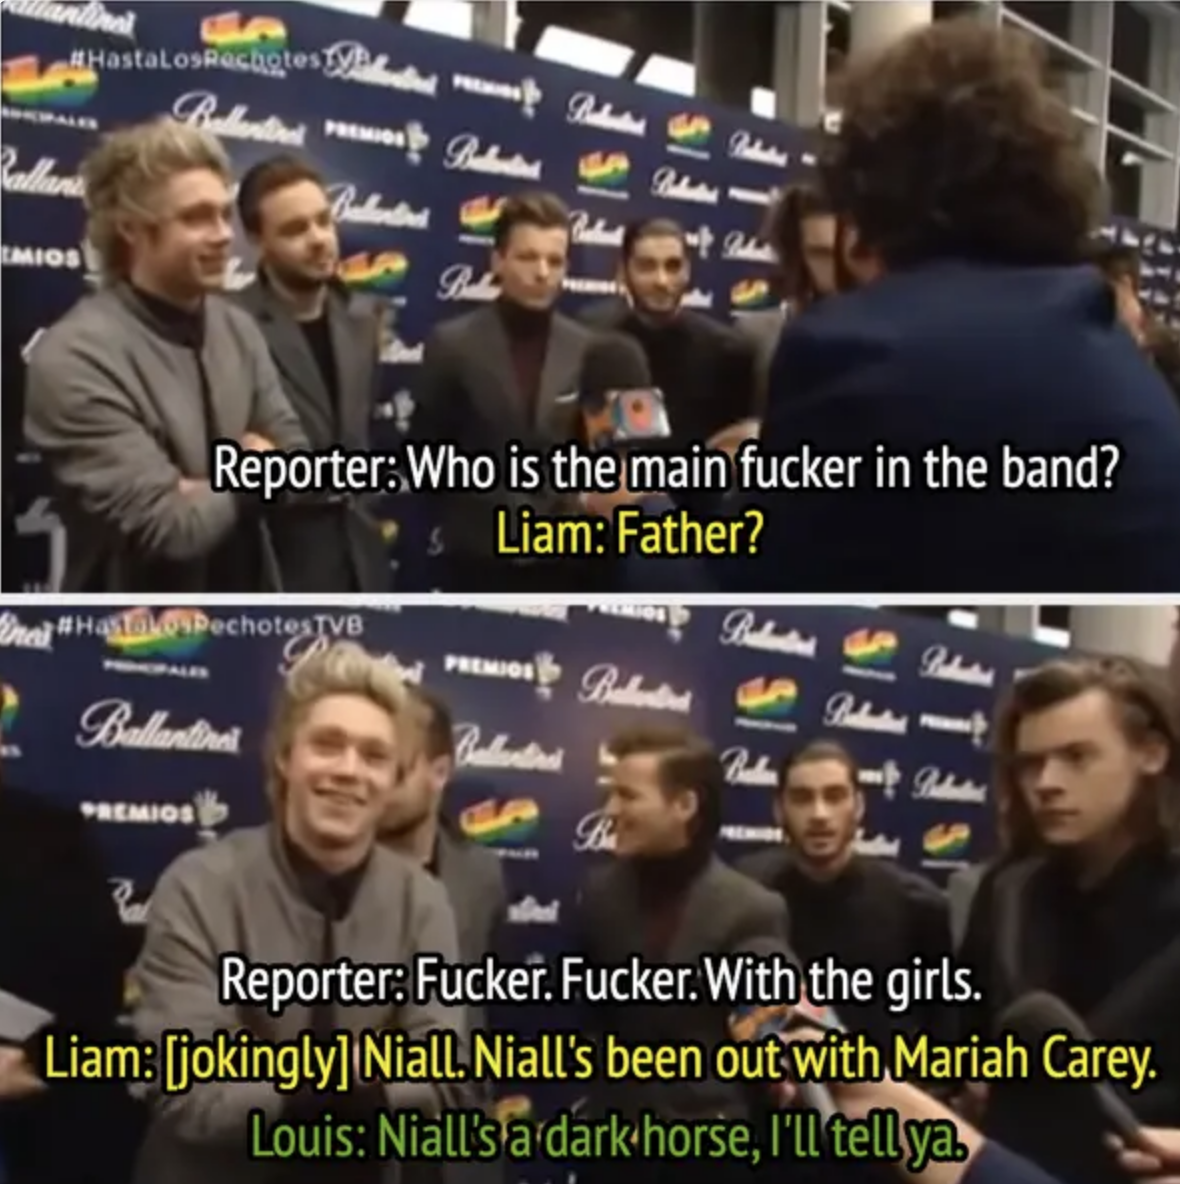 the reporter asks who&#x27;s the &quot;main fucker&quot; of the band, and Liam and Louis jokingly reply it&#x27;s Niall